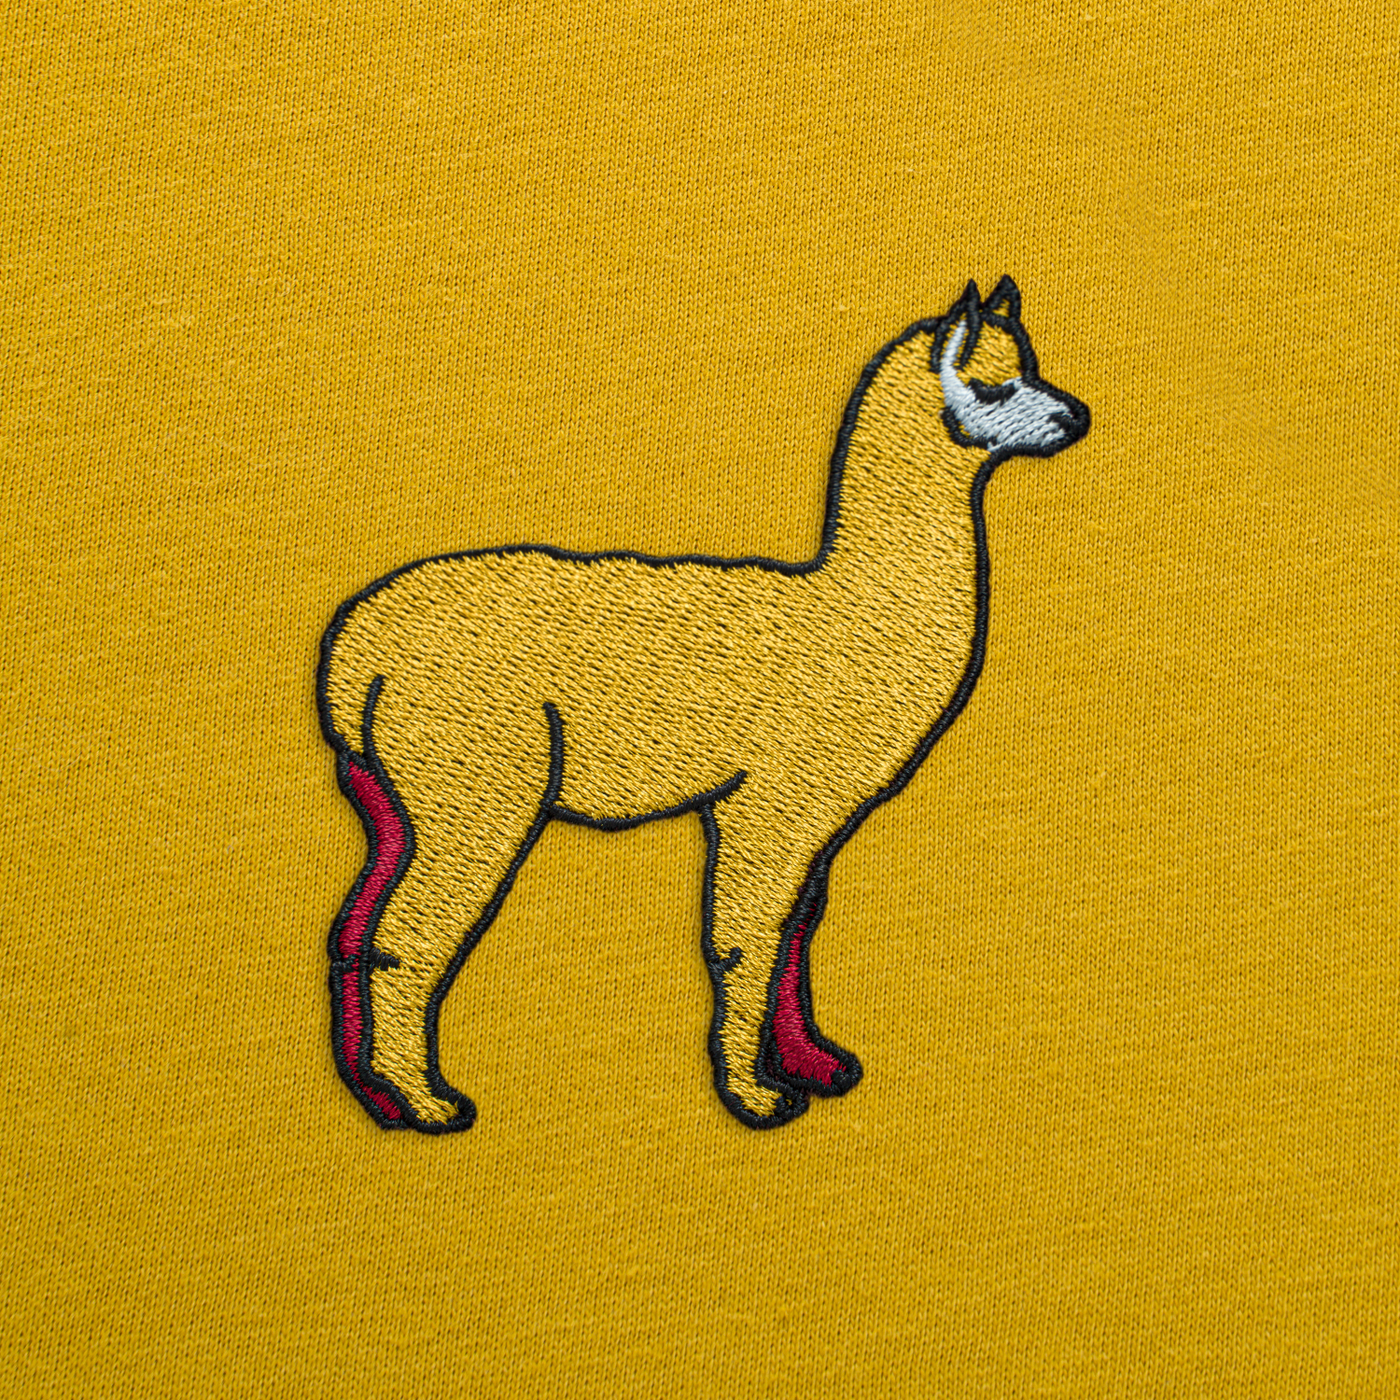 Bobby's Planet Men's Embroidered Alpaca T-Shirt from South American Amazon Animals Collection in Mustard Color#color_mustard